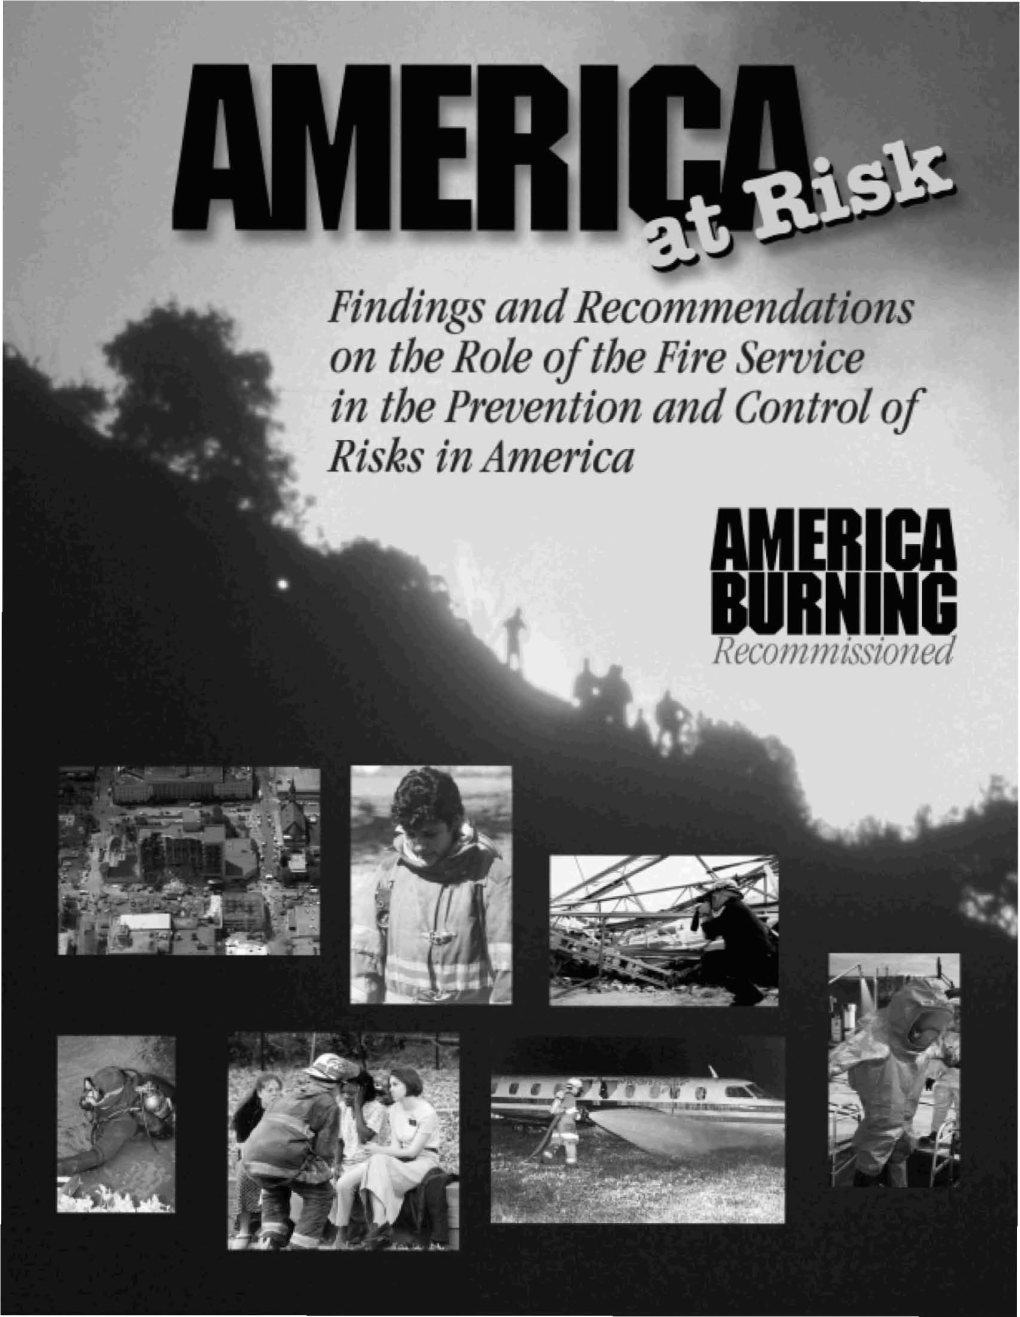 America Burning Recommissioned II • AMERICA BURNING Recommissioned James Lee Witt, Director Federal Emergency FOREWORD Management Agency Foreword